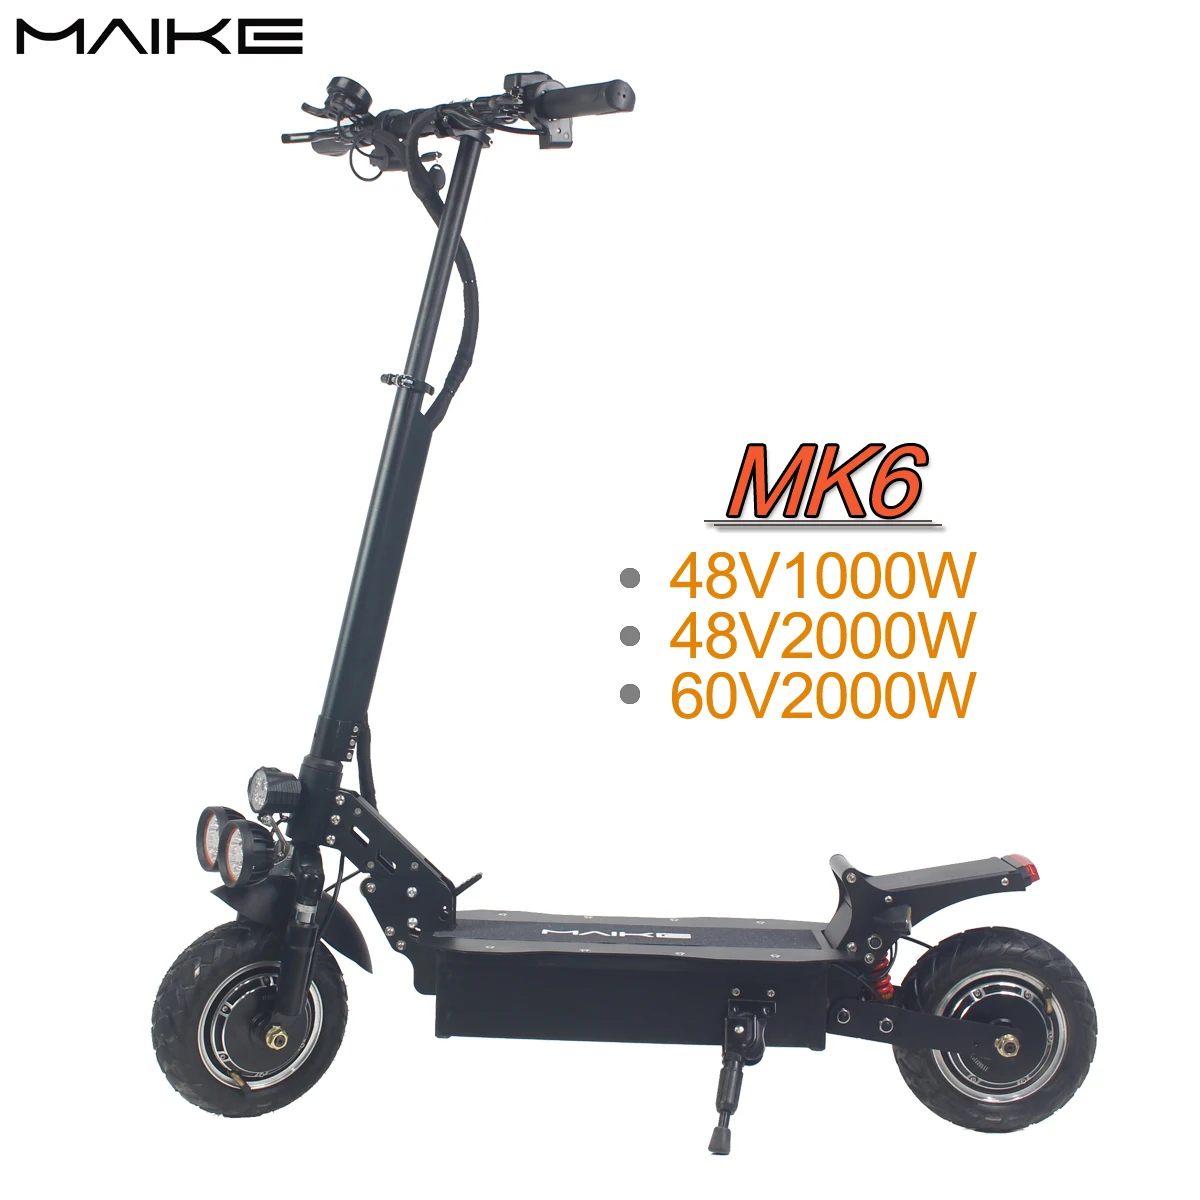 

Maike 2021 new arrival 2000W/1000W MK6 25Ah escooter cheap China off road foldable adult electric scooter for sale